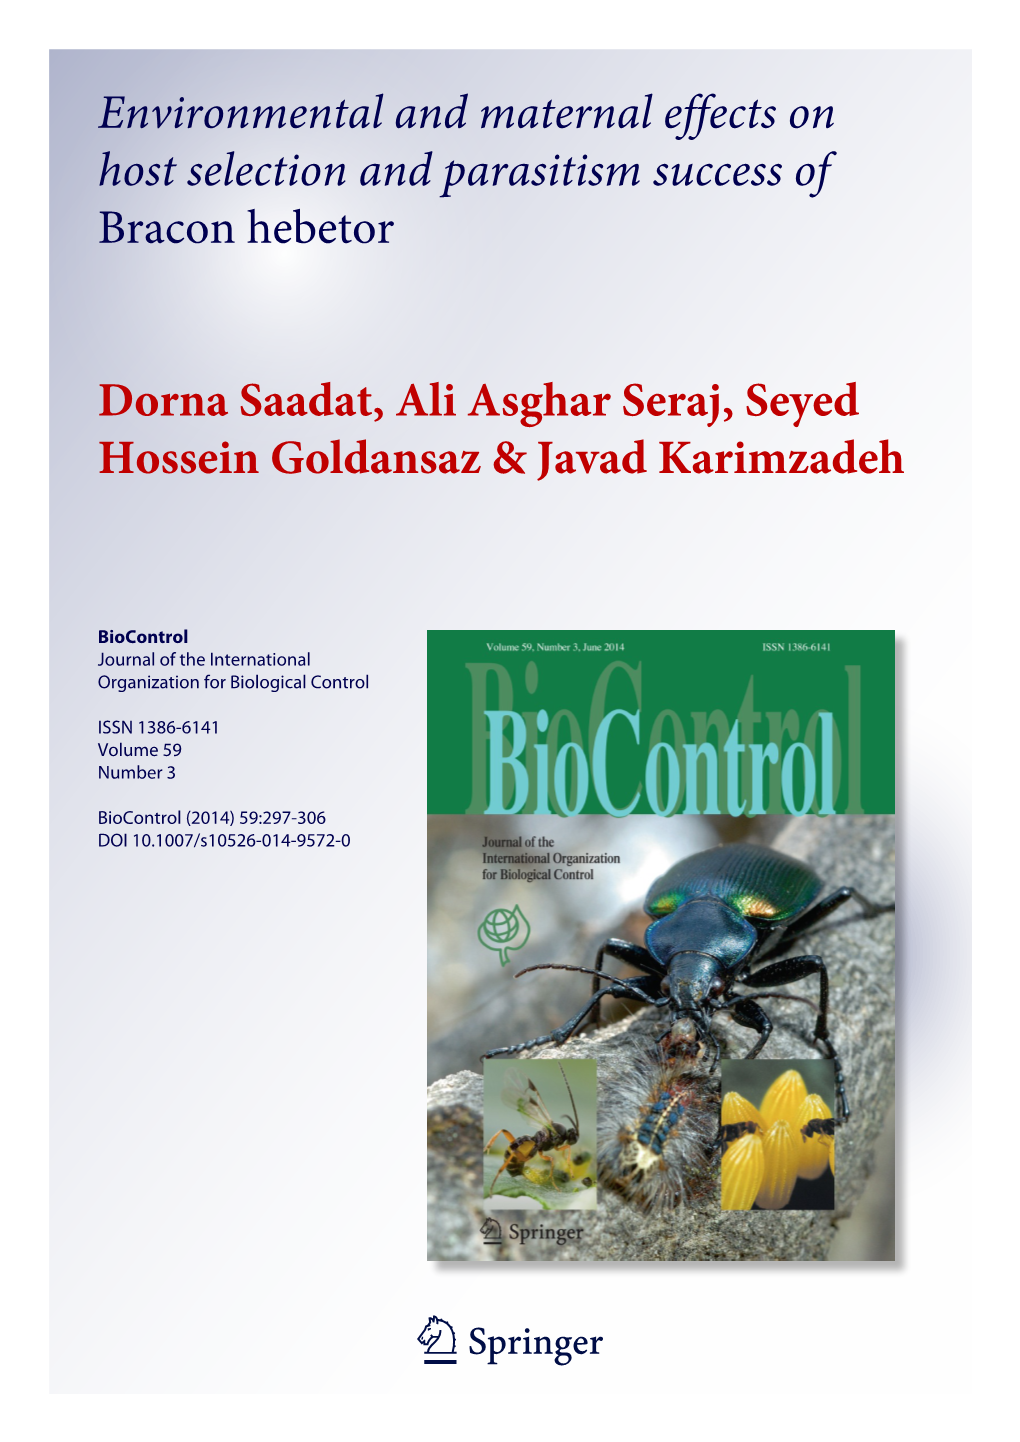 Environmental and Maternal Effects on Host Selection and Parasitism Success of Bracon Hebetor